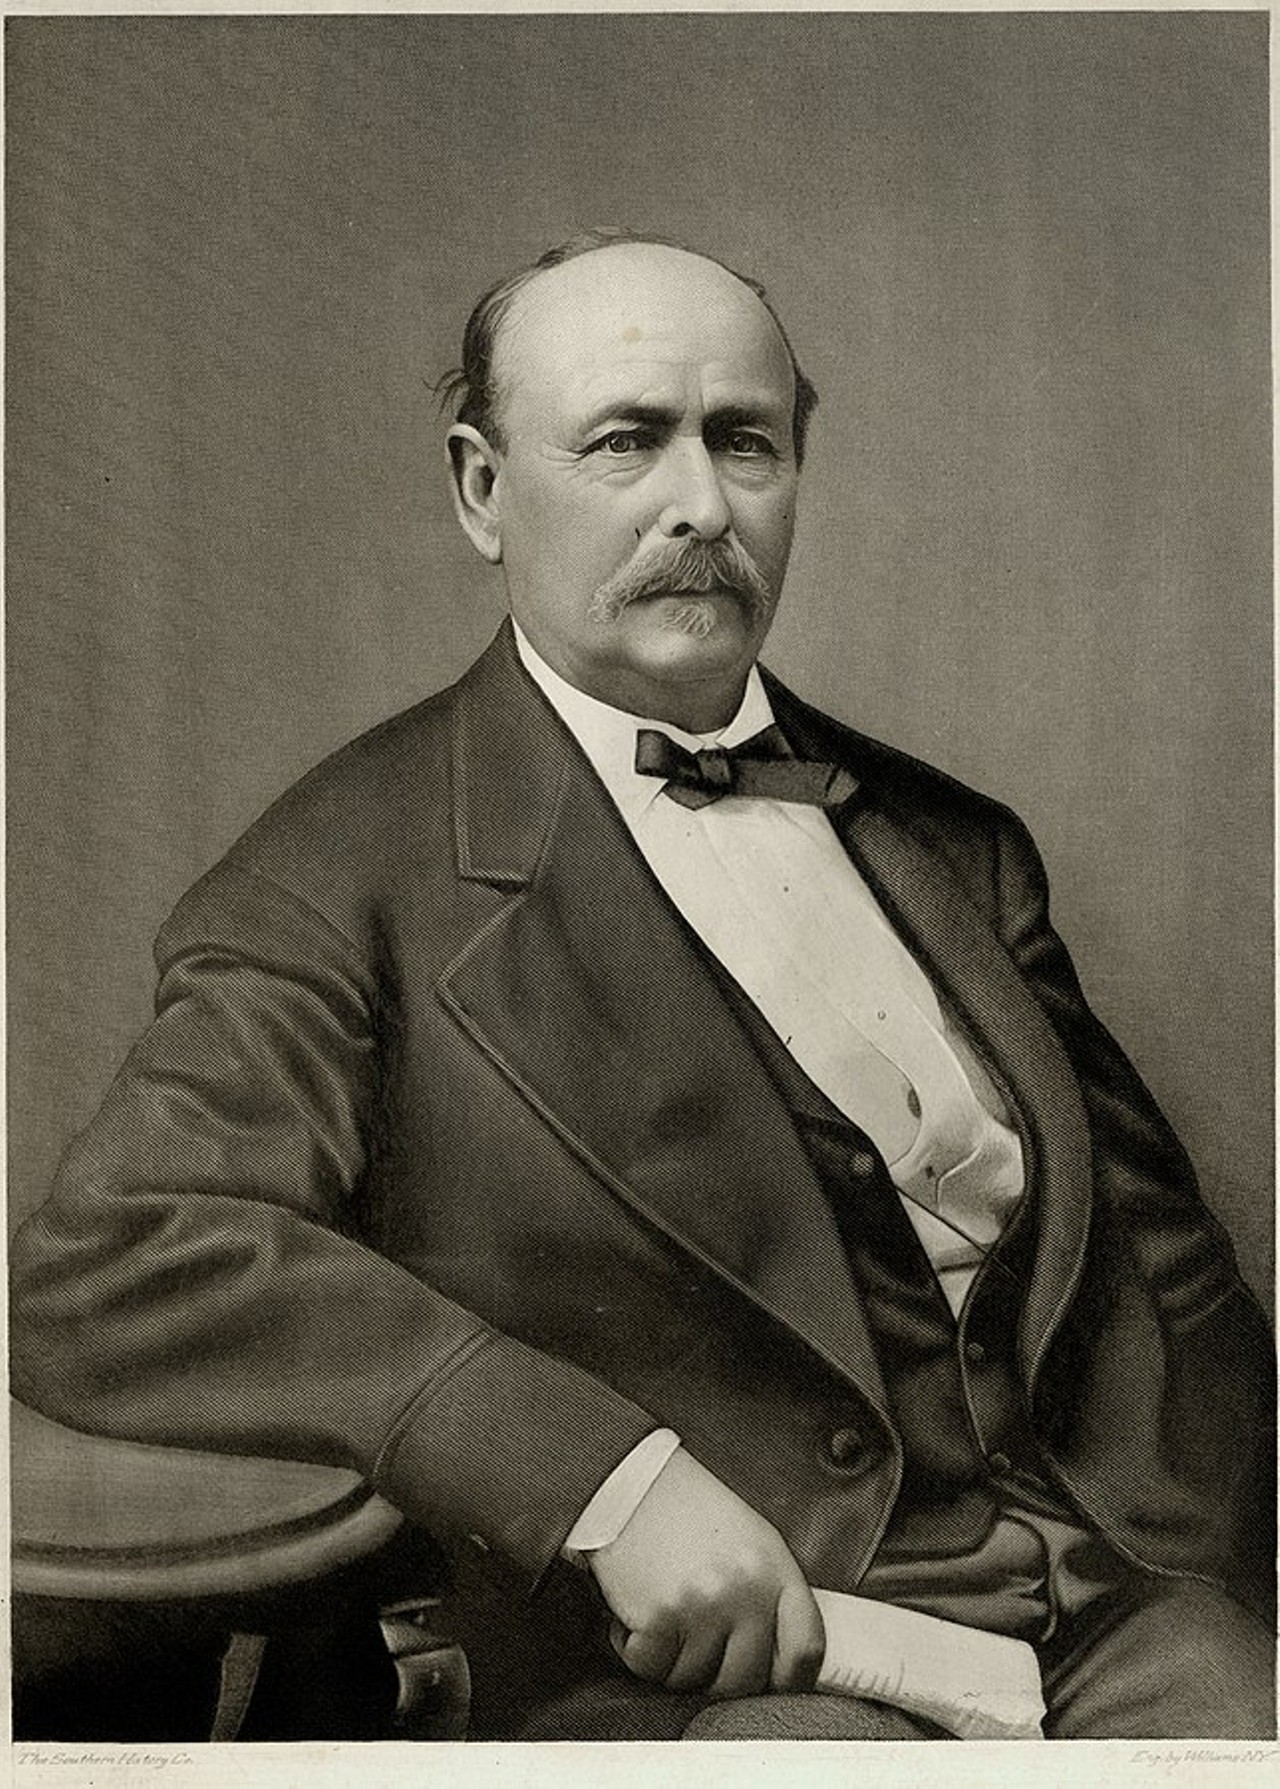 Eberhard Anheuser
Businessman and father-in-law of Adolphus Busch, the founder of the Anheuser-Busch Company.
Photo credit: Wikimedia Commons